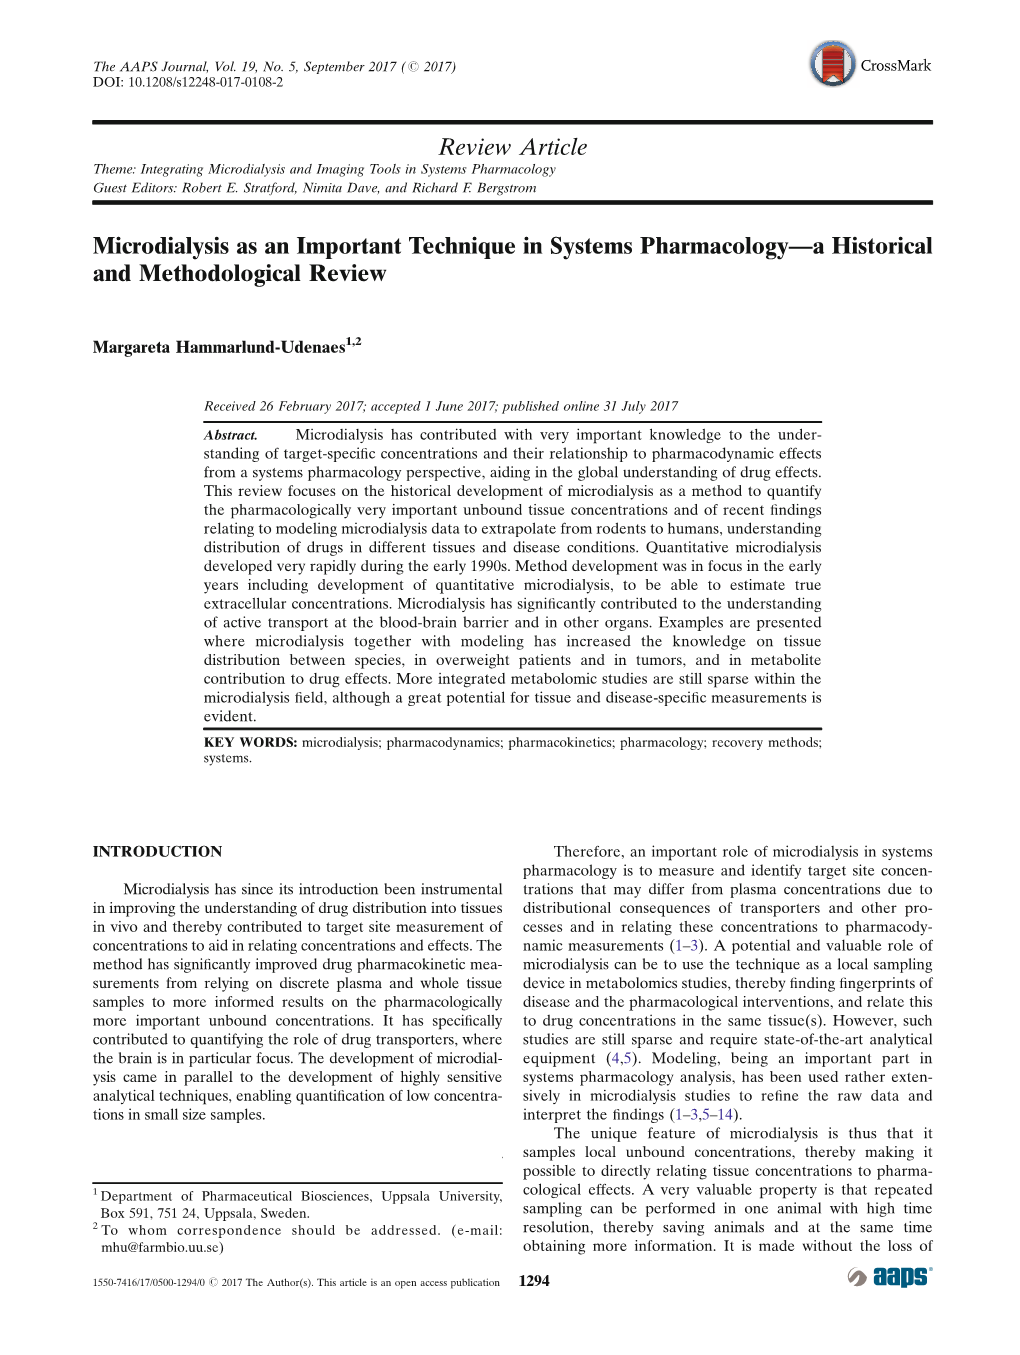 Microdialysis As an Important Technique in Systems Pharmacology—A Historical and Methodological Review